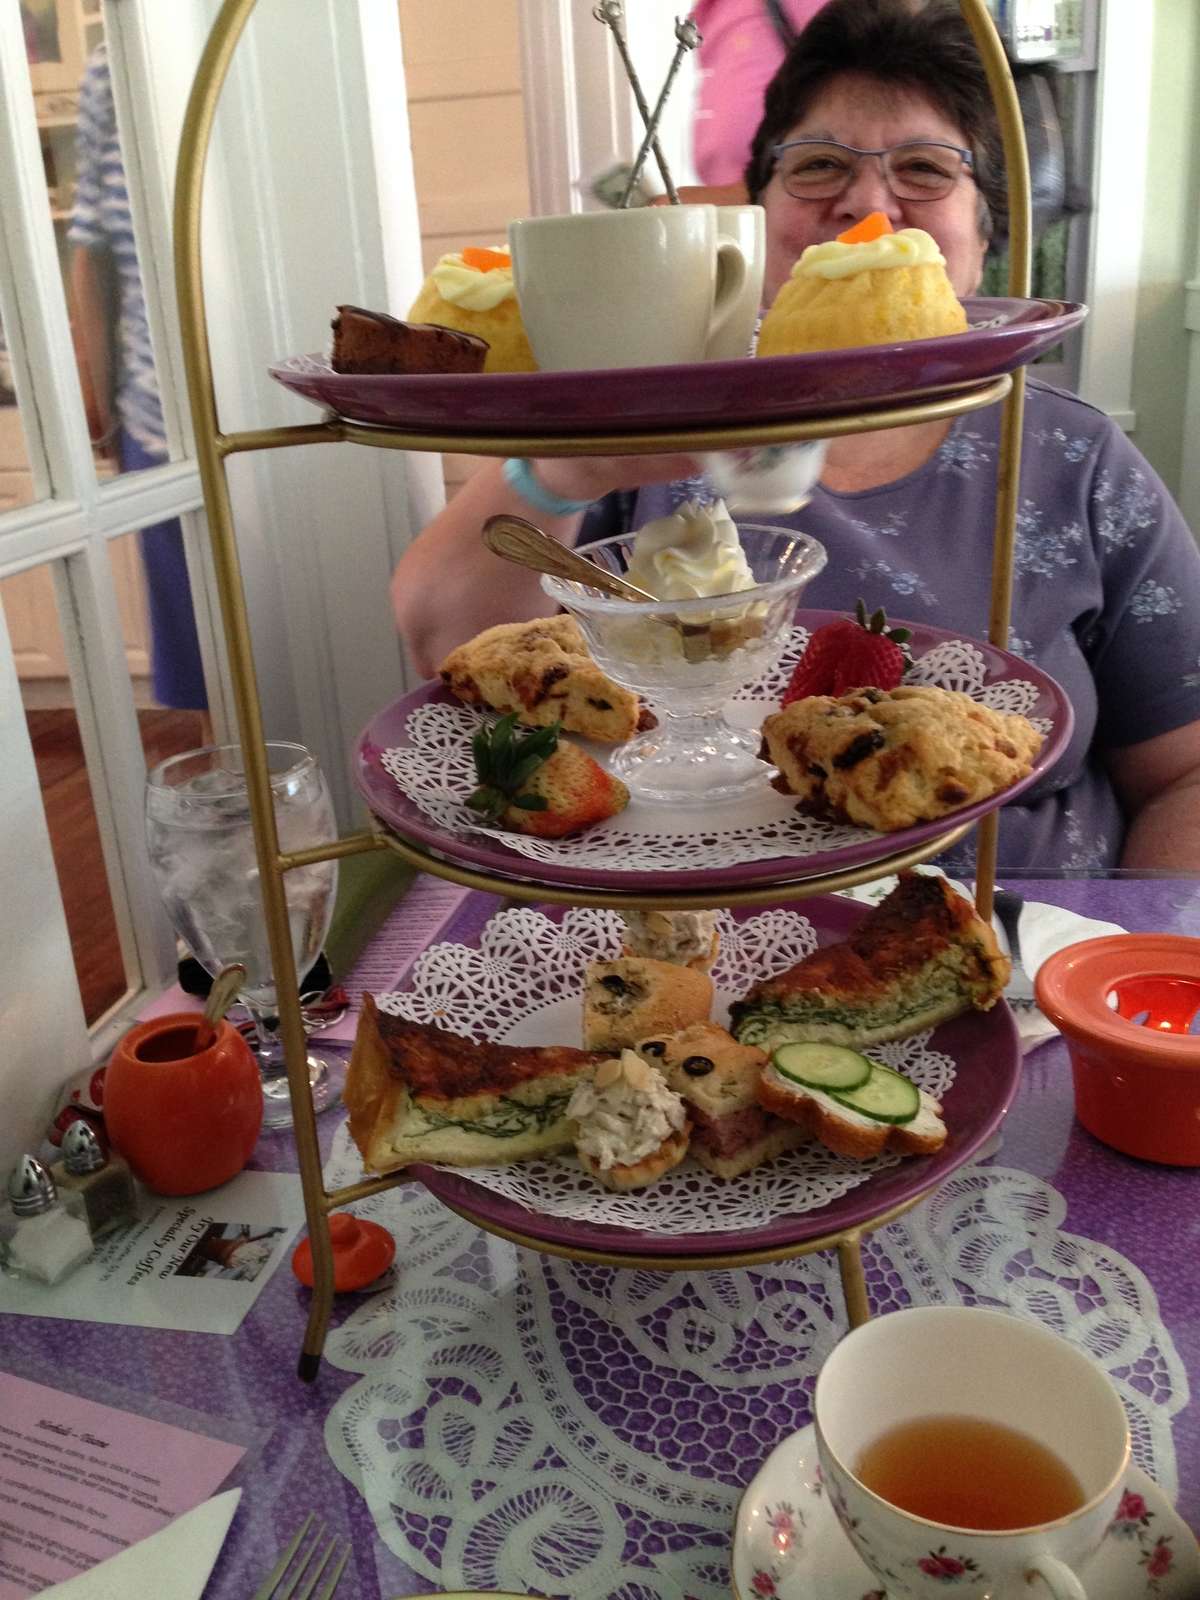 Kelly P S Review For Wisteria Tea Room Cafe Fort Myers